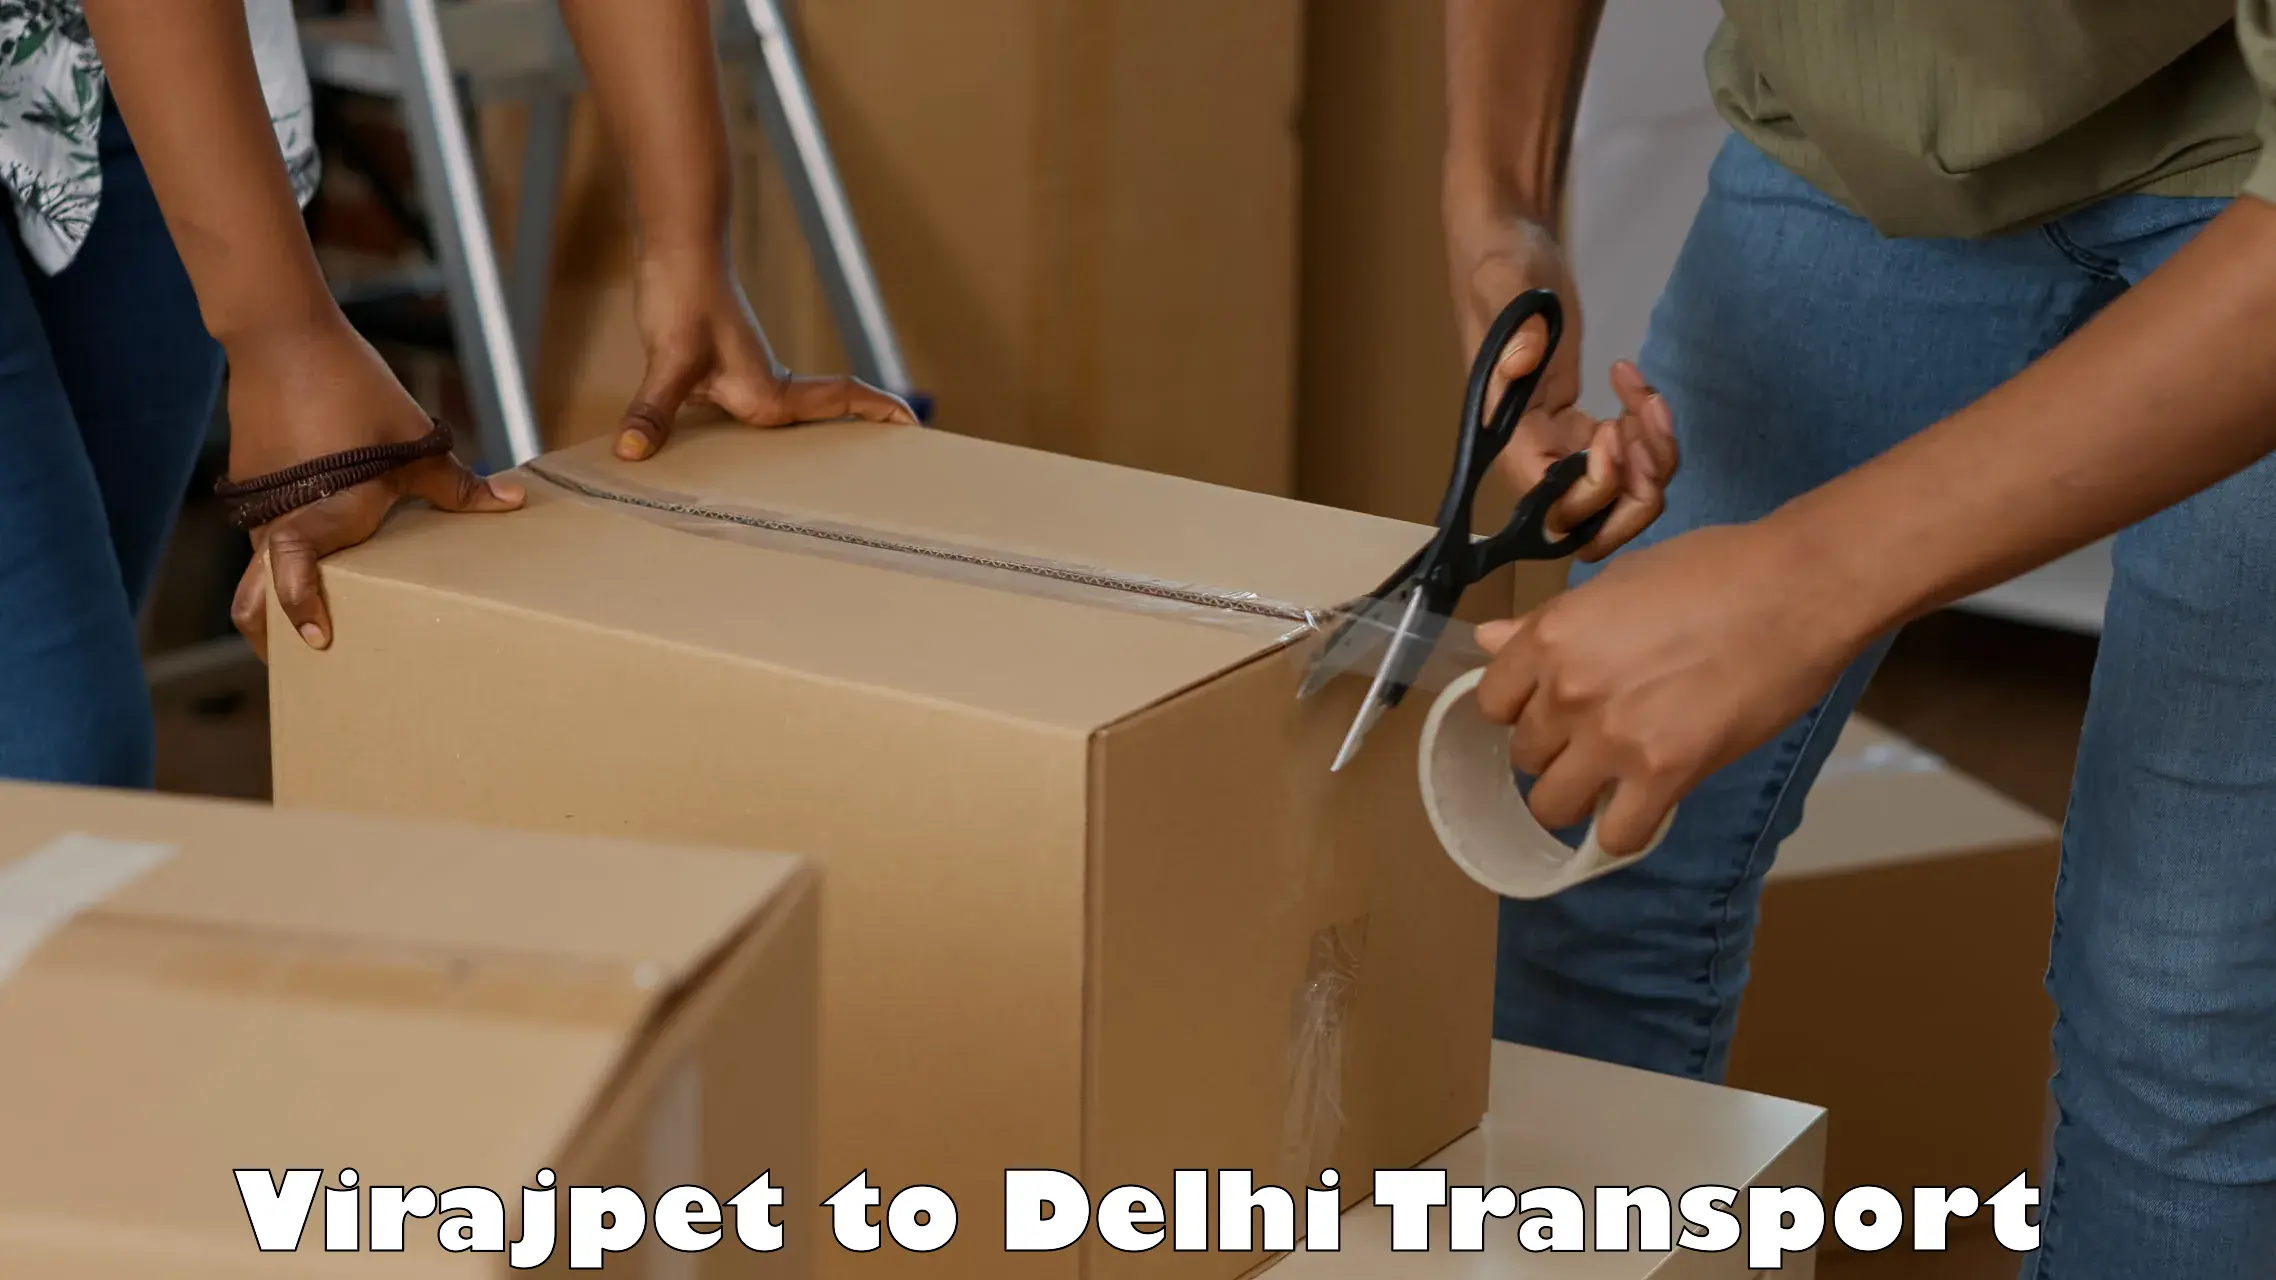 Transport bike from one state to another Virajpet to IIT Delhi